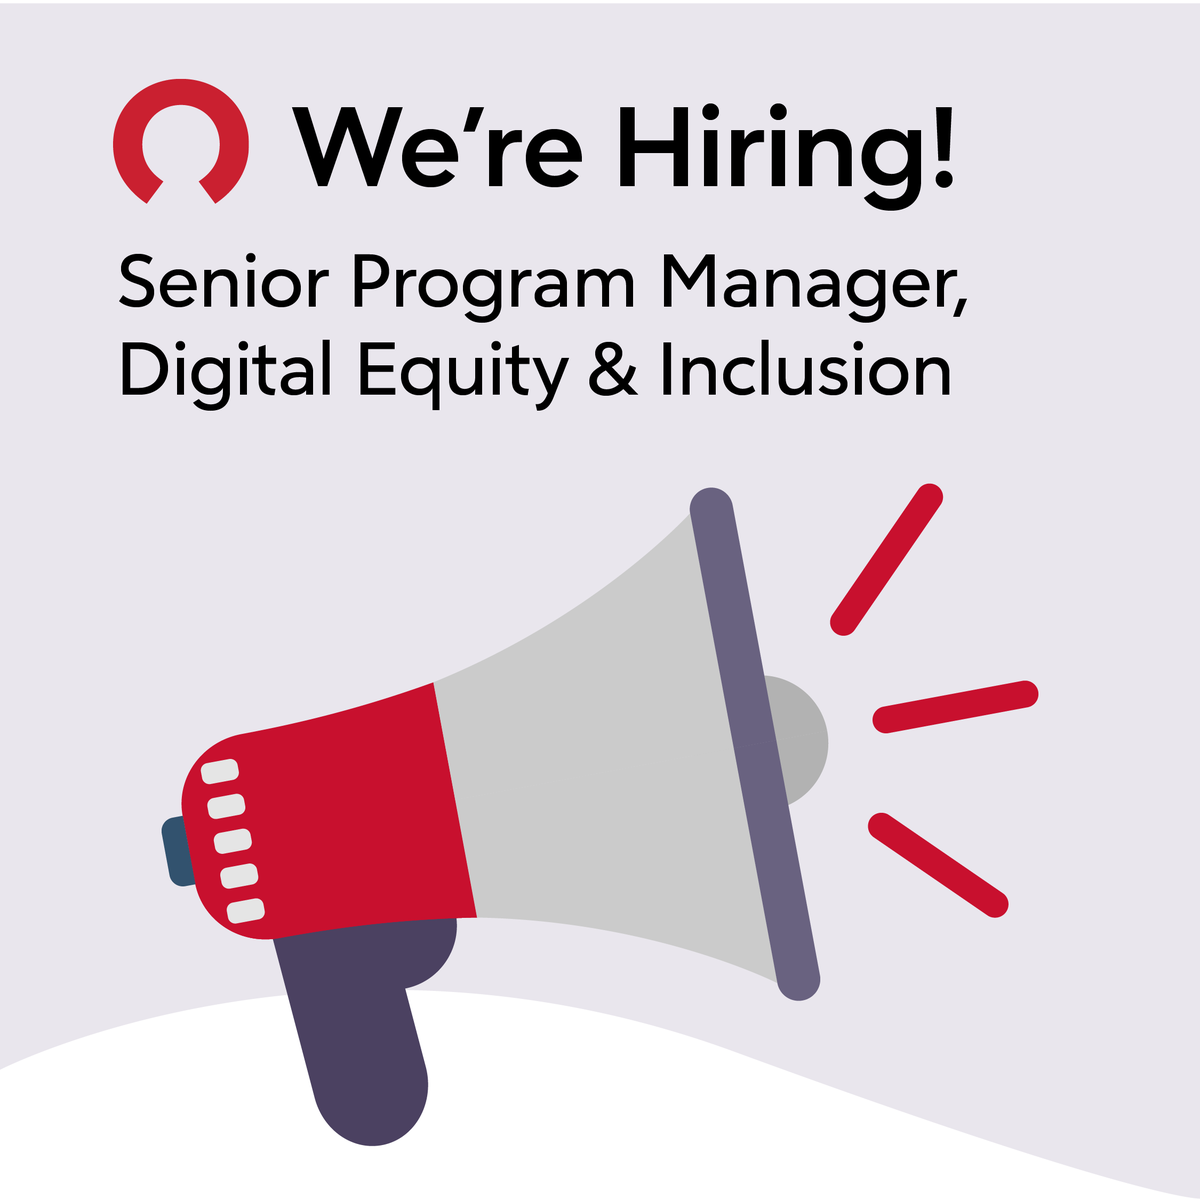 We're looking for a Senior Program Manager, Digital Equity & Inclusion to join our Education & Employment team!

If you're passionate about #digitalaccess & have experience in #digitalequity, we'd love to hear from you: bit.ly/3IADZUx

#hiring #detroit #jobopportunity